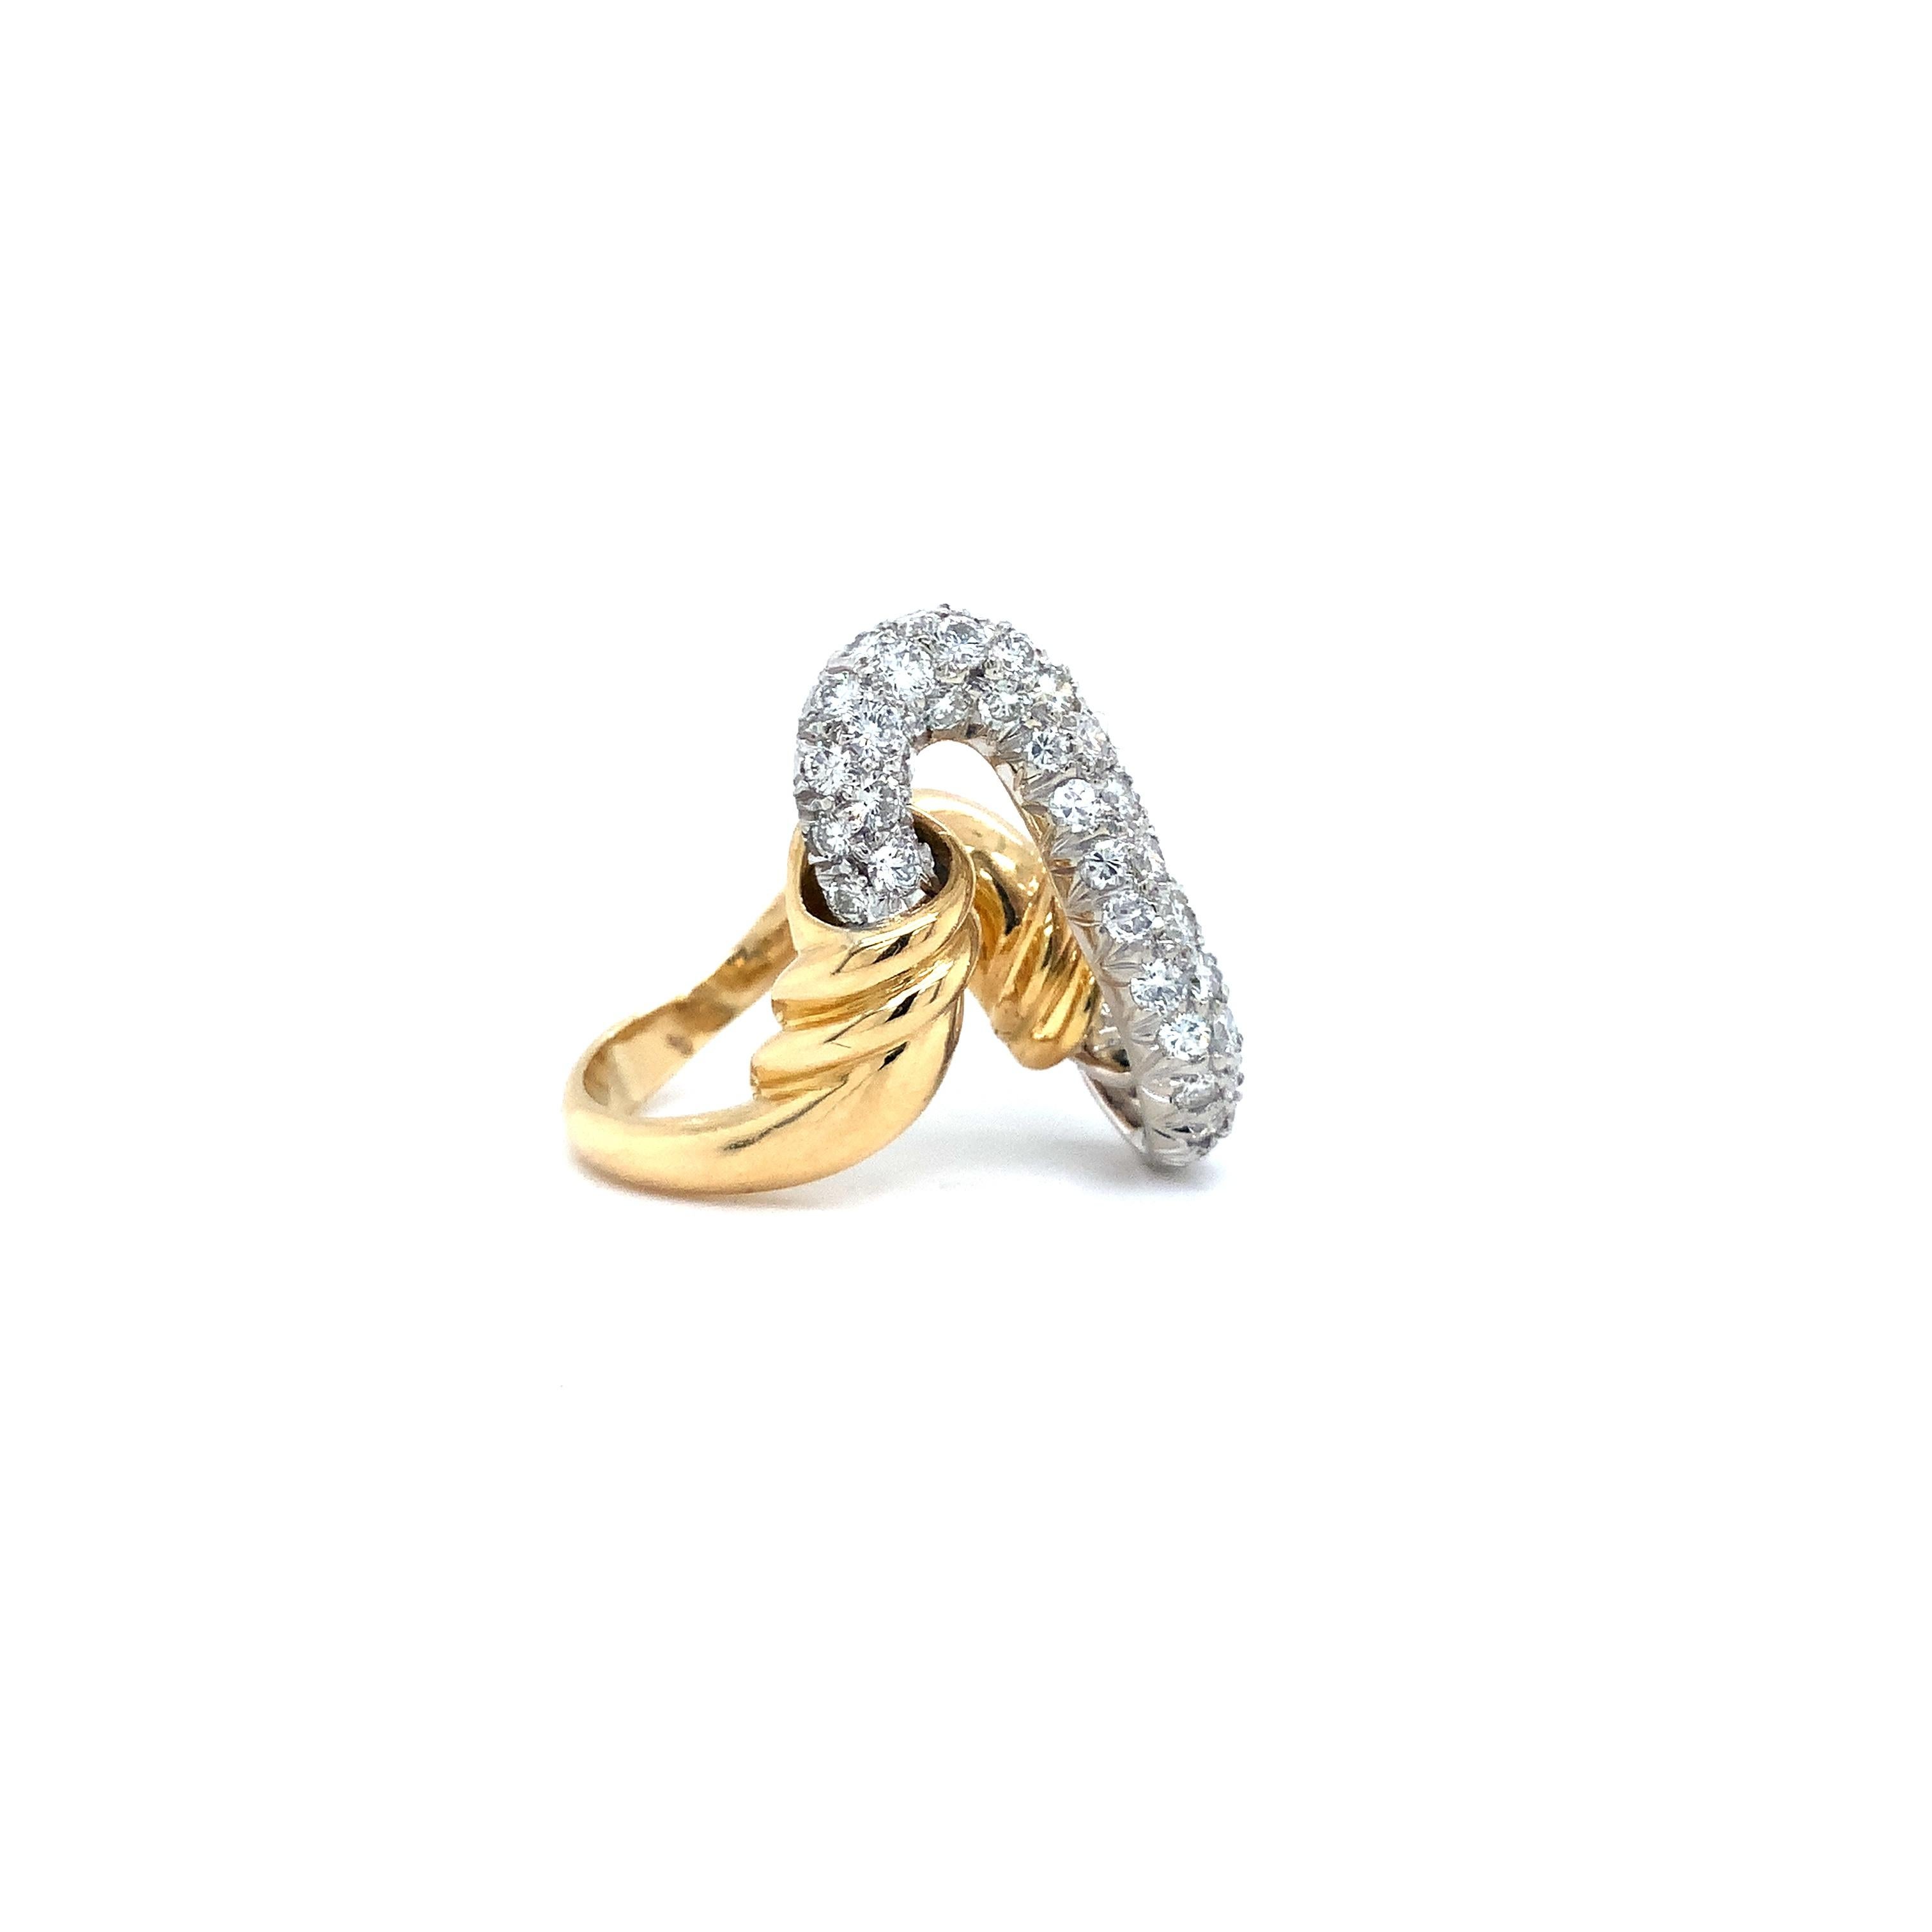 Vintage Pave Diamond Ring Fashioned in 18 kt Yellow and White Gold. For Sale 1